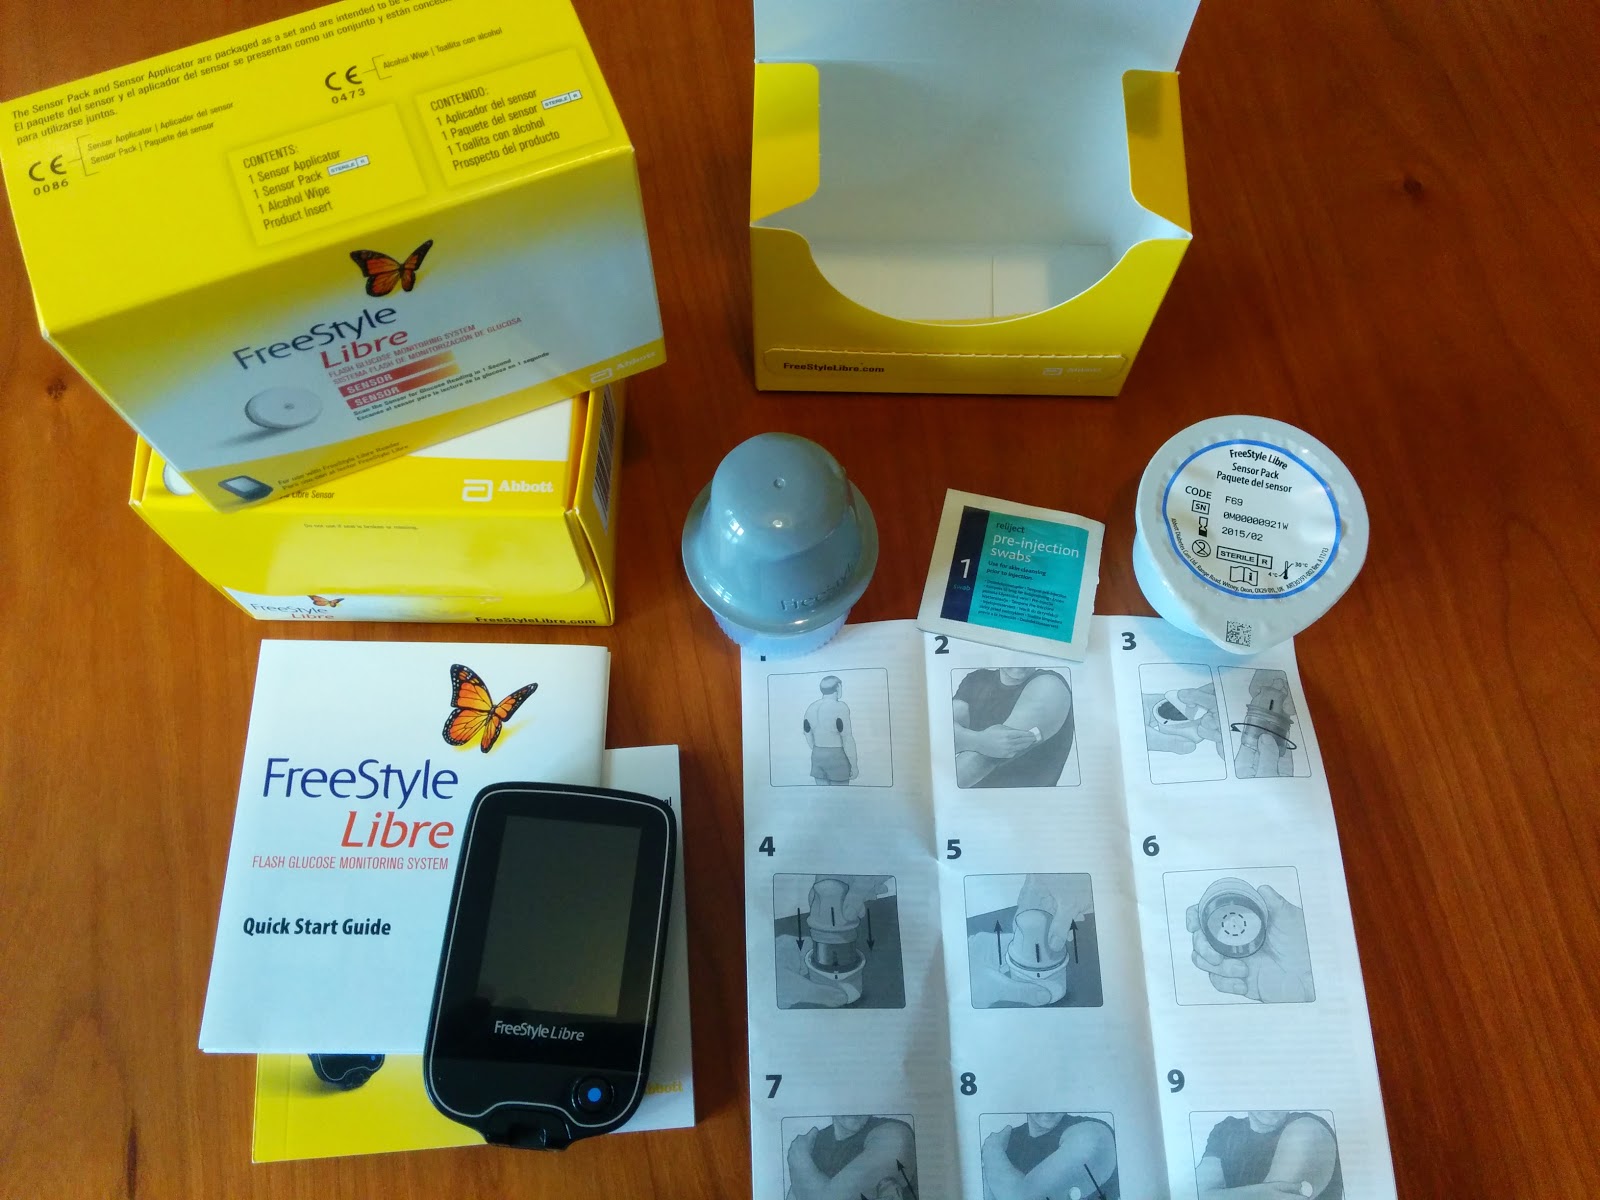 T1 ramblings: Review: The Abbott Freestyle Libre